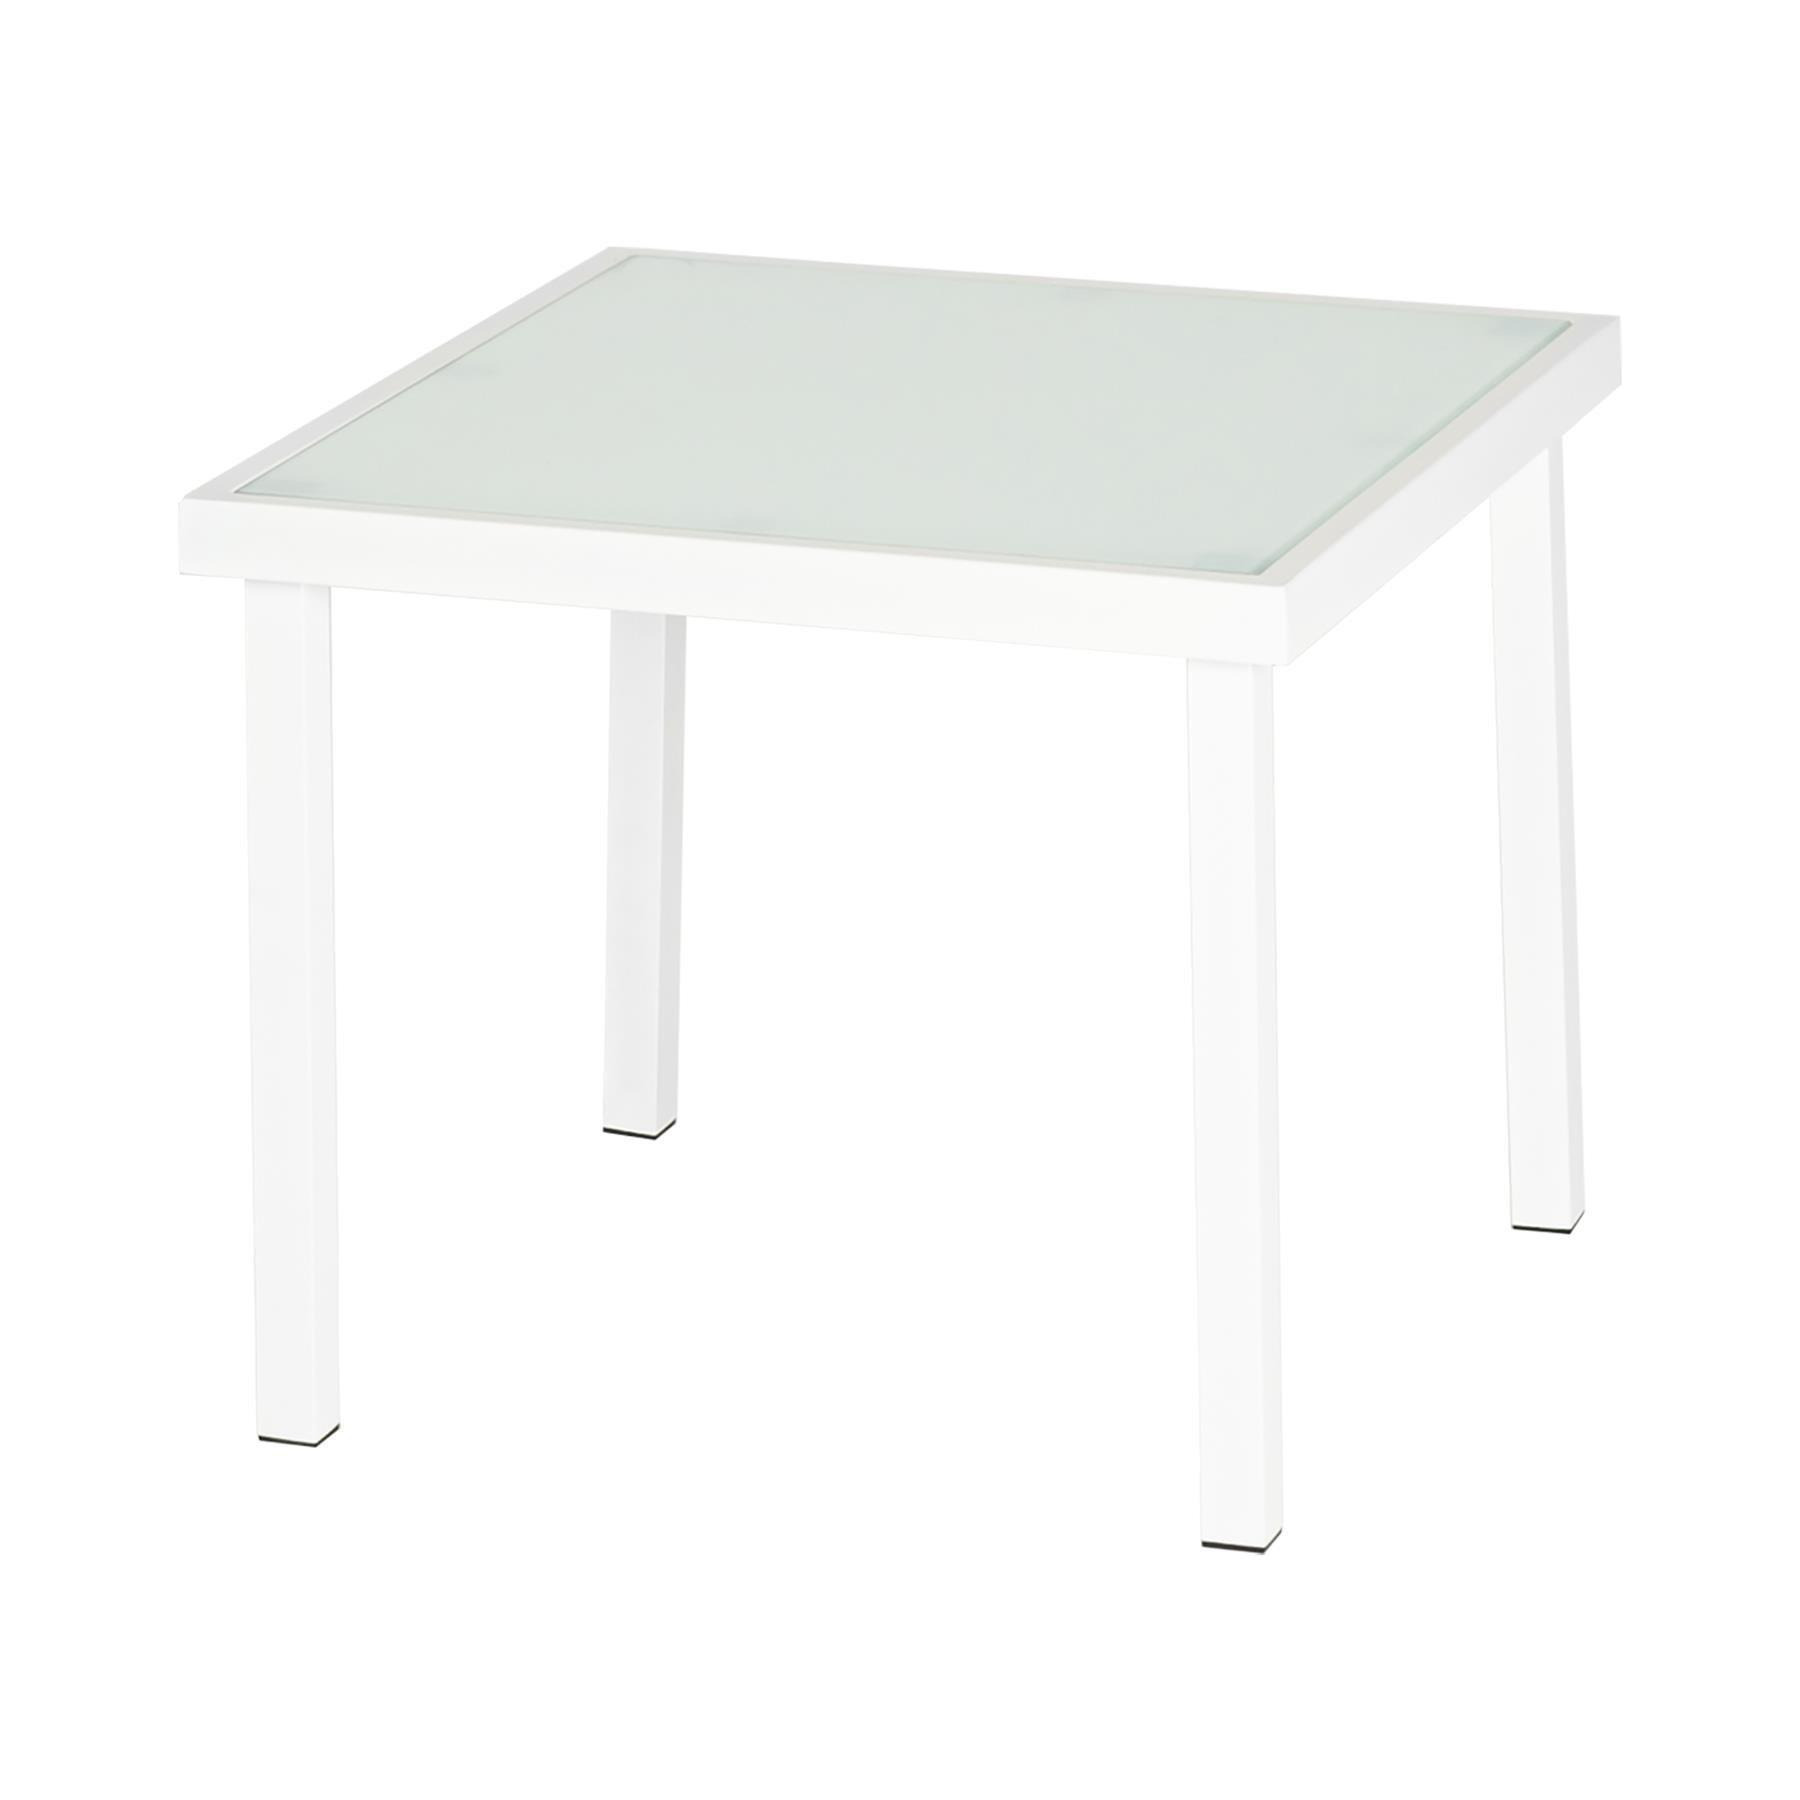 Sussex Garden Side Table 44 x 44cm - image 1